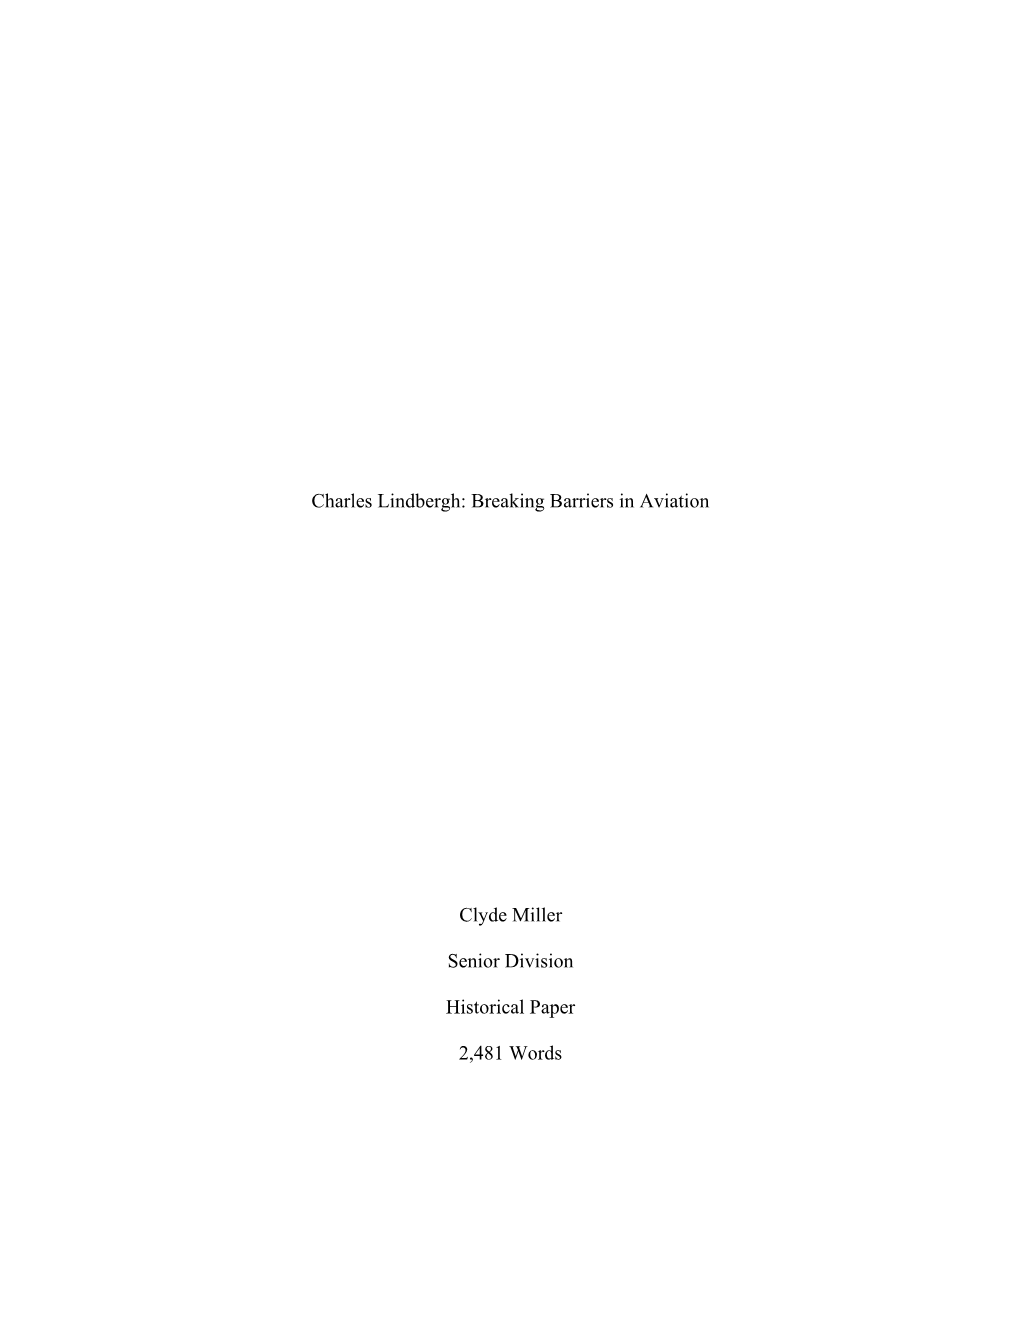 Charles Lindbergh: Breaking Barriers in Aviation Clyde Miller Senior Division Historical Paper 2,481 Words